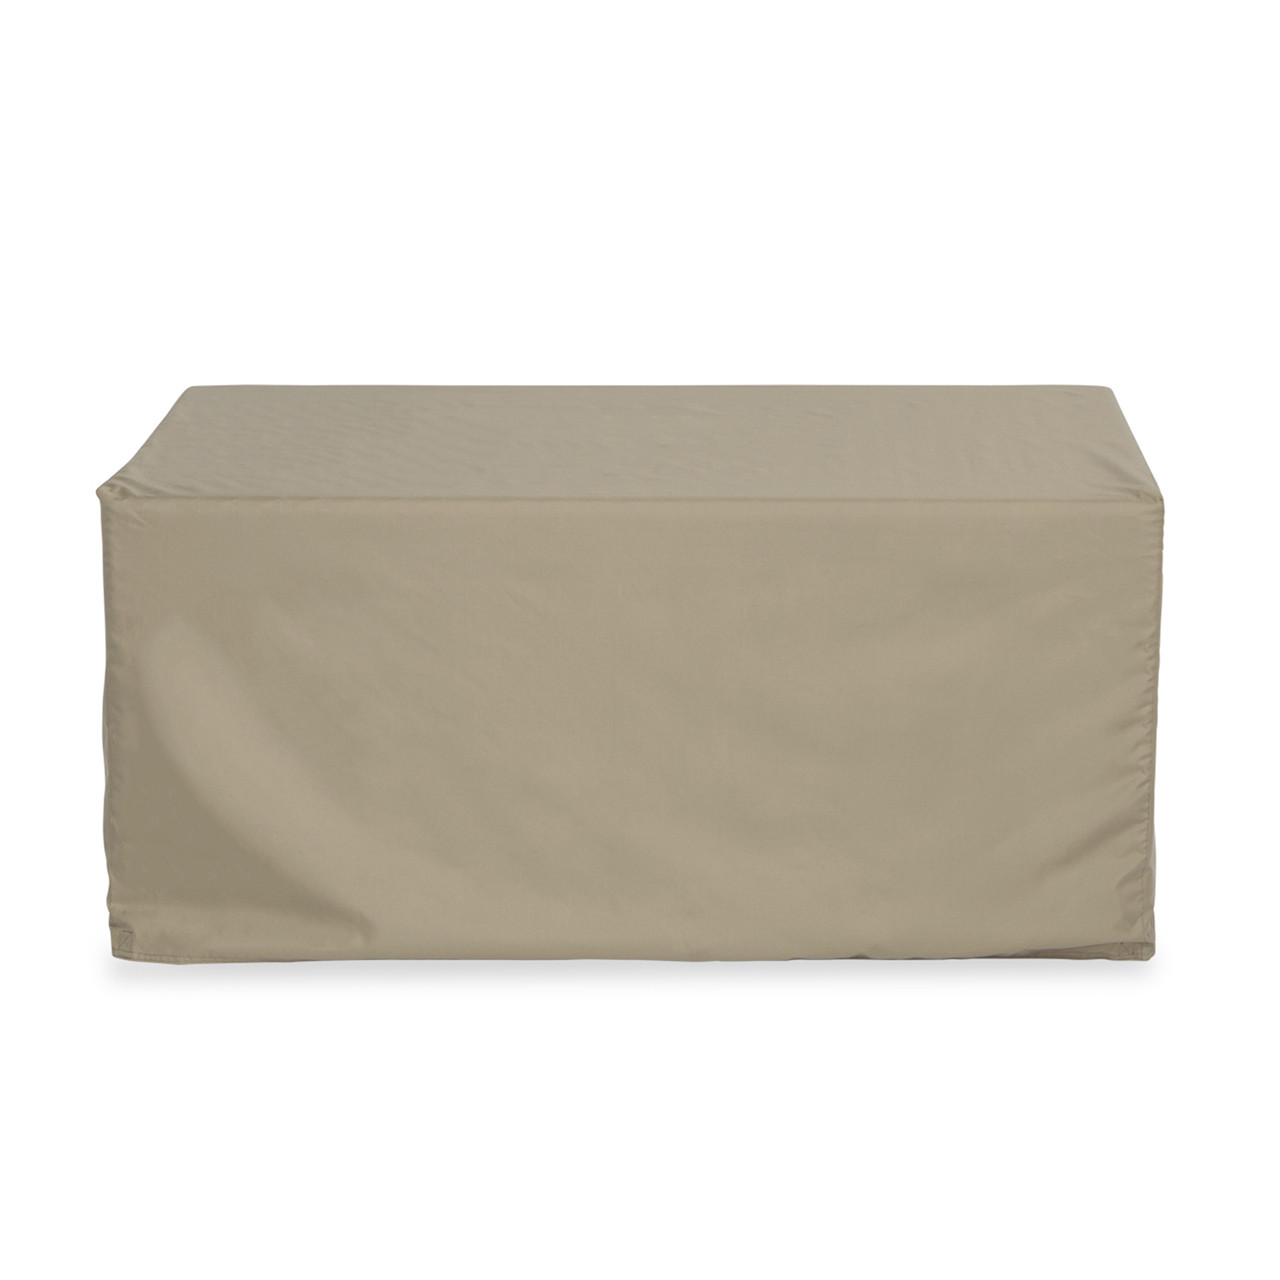 52 x 36 in. Rectangular Fire Pit Protective Cover